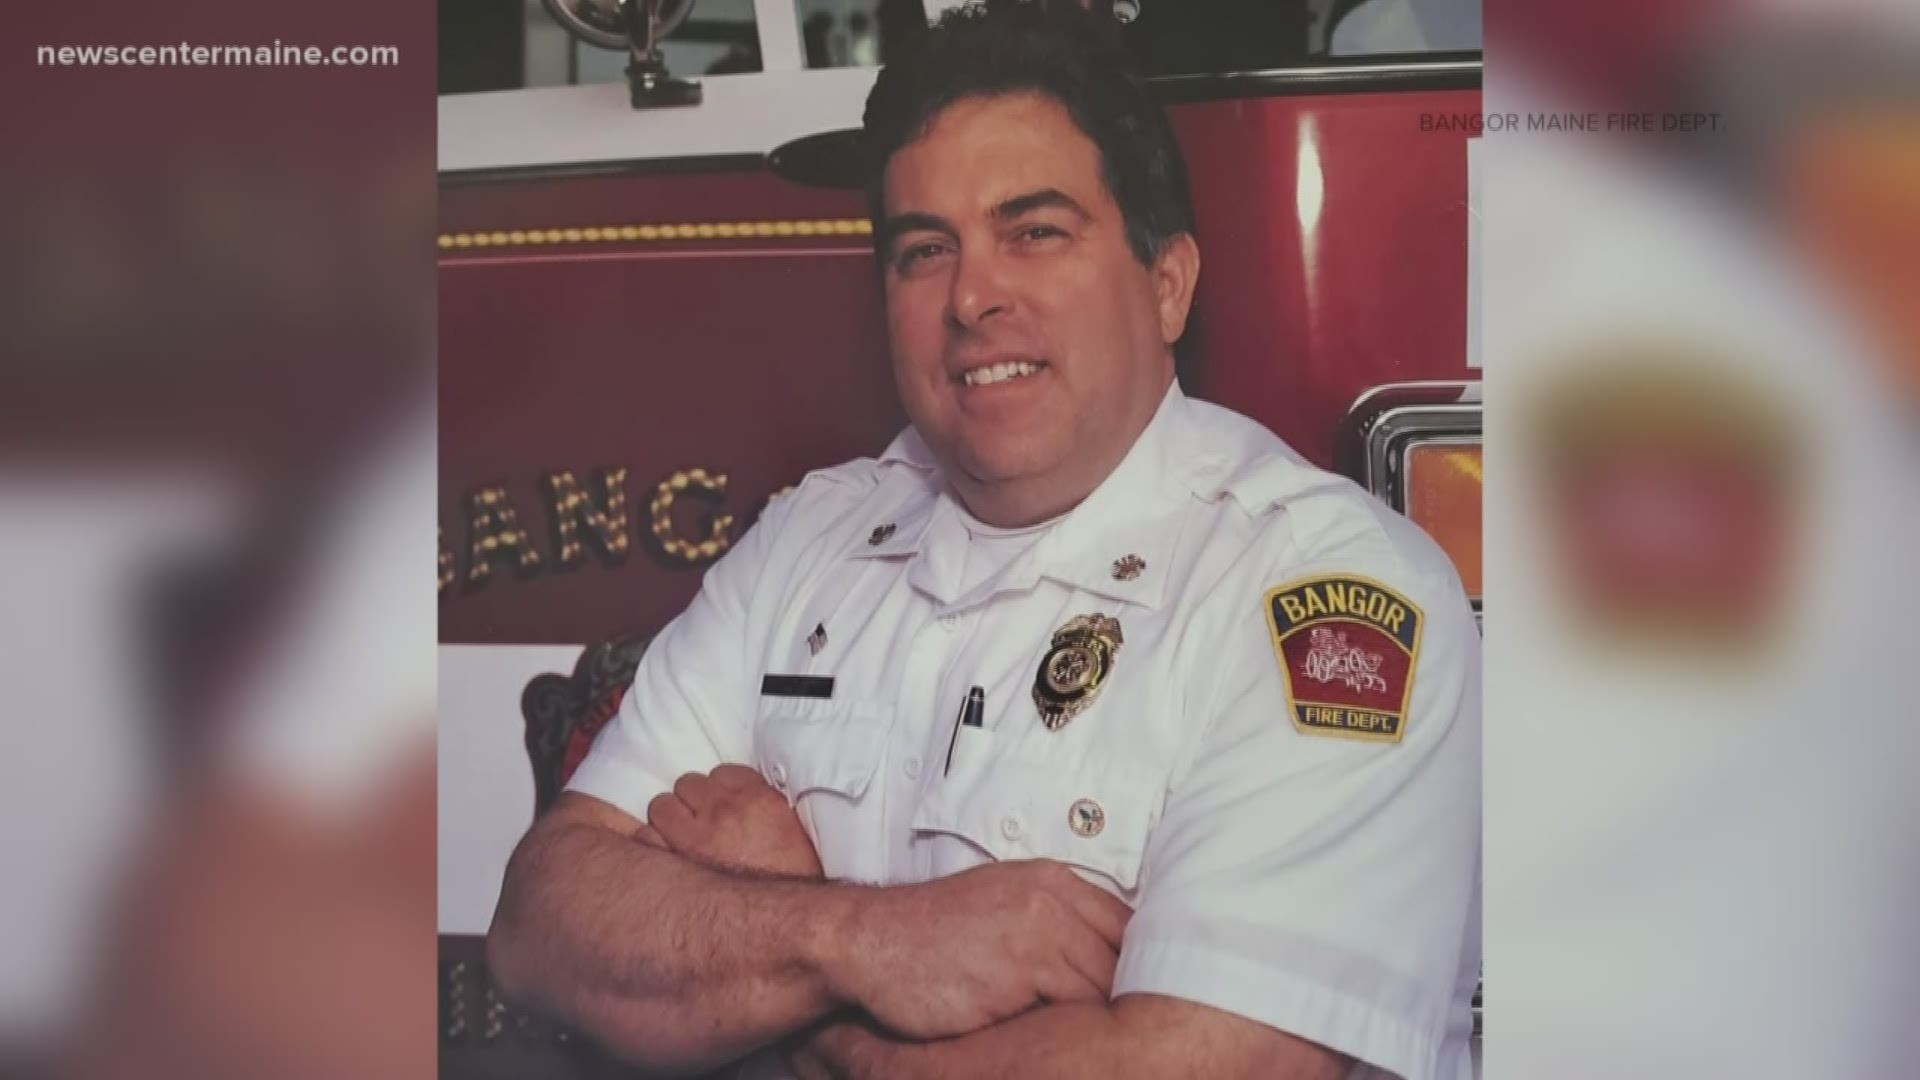 Bangor's former fire chief Jeffrey Cammack has passed away. He began his career with the Bangor Fire Department in 1979 and served as chief from 1996 until 2012.